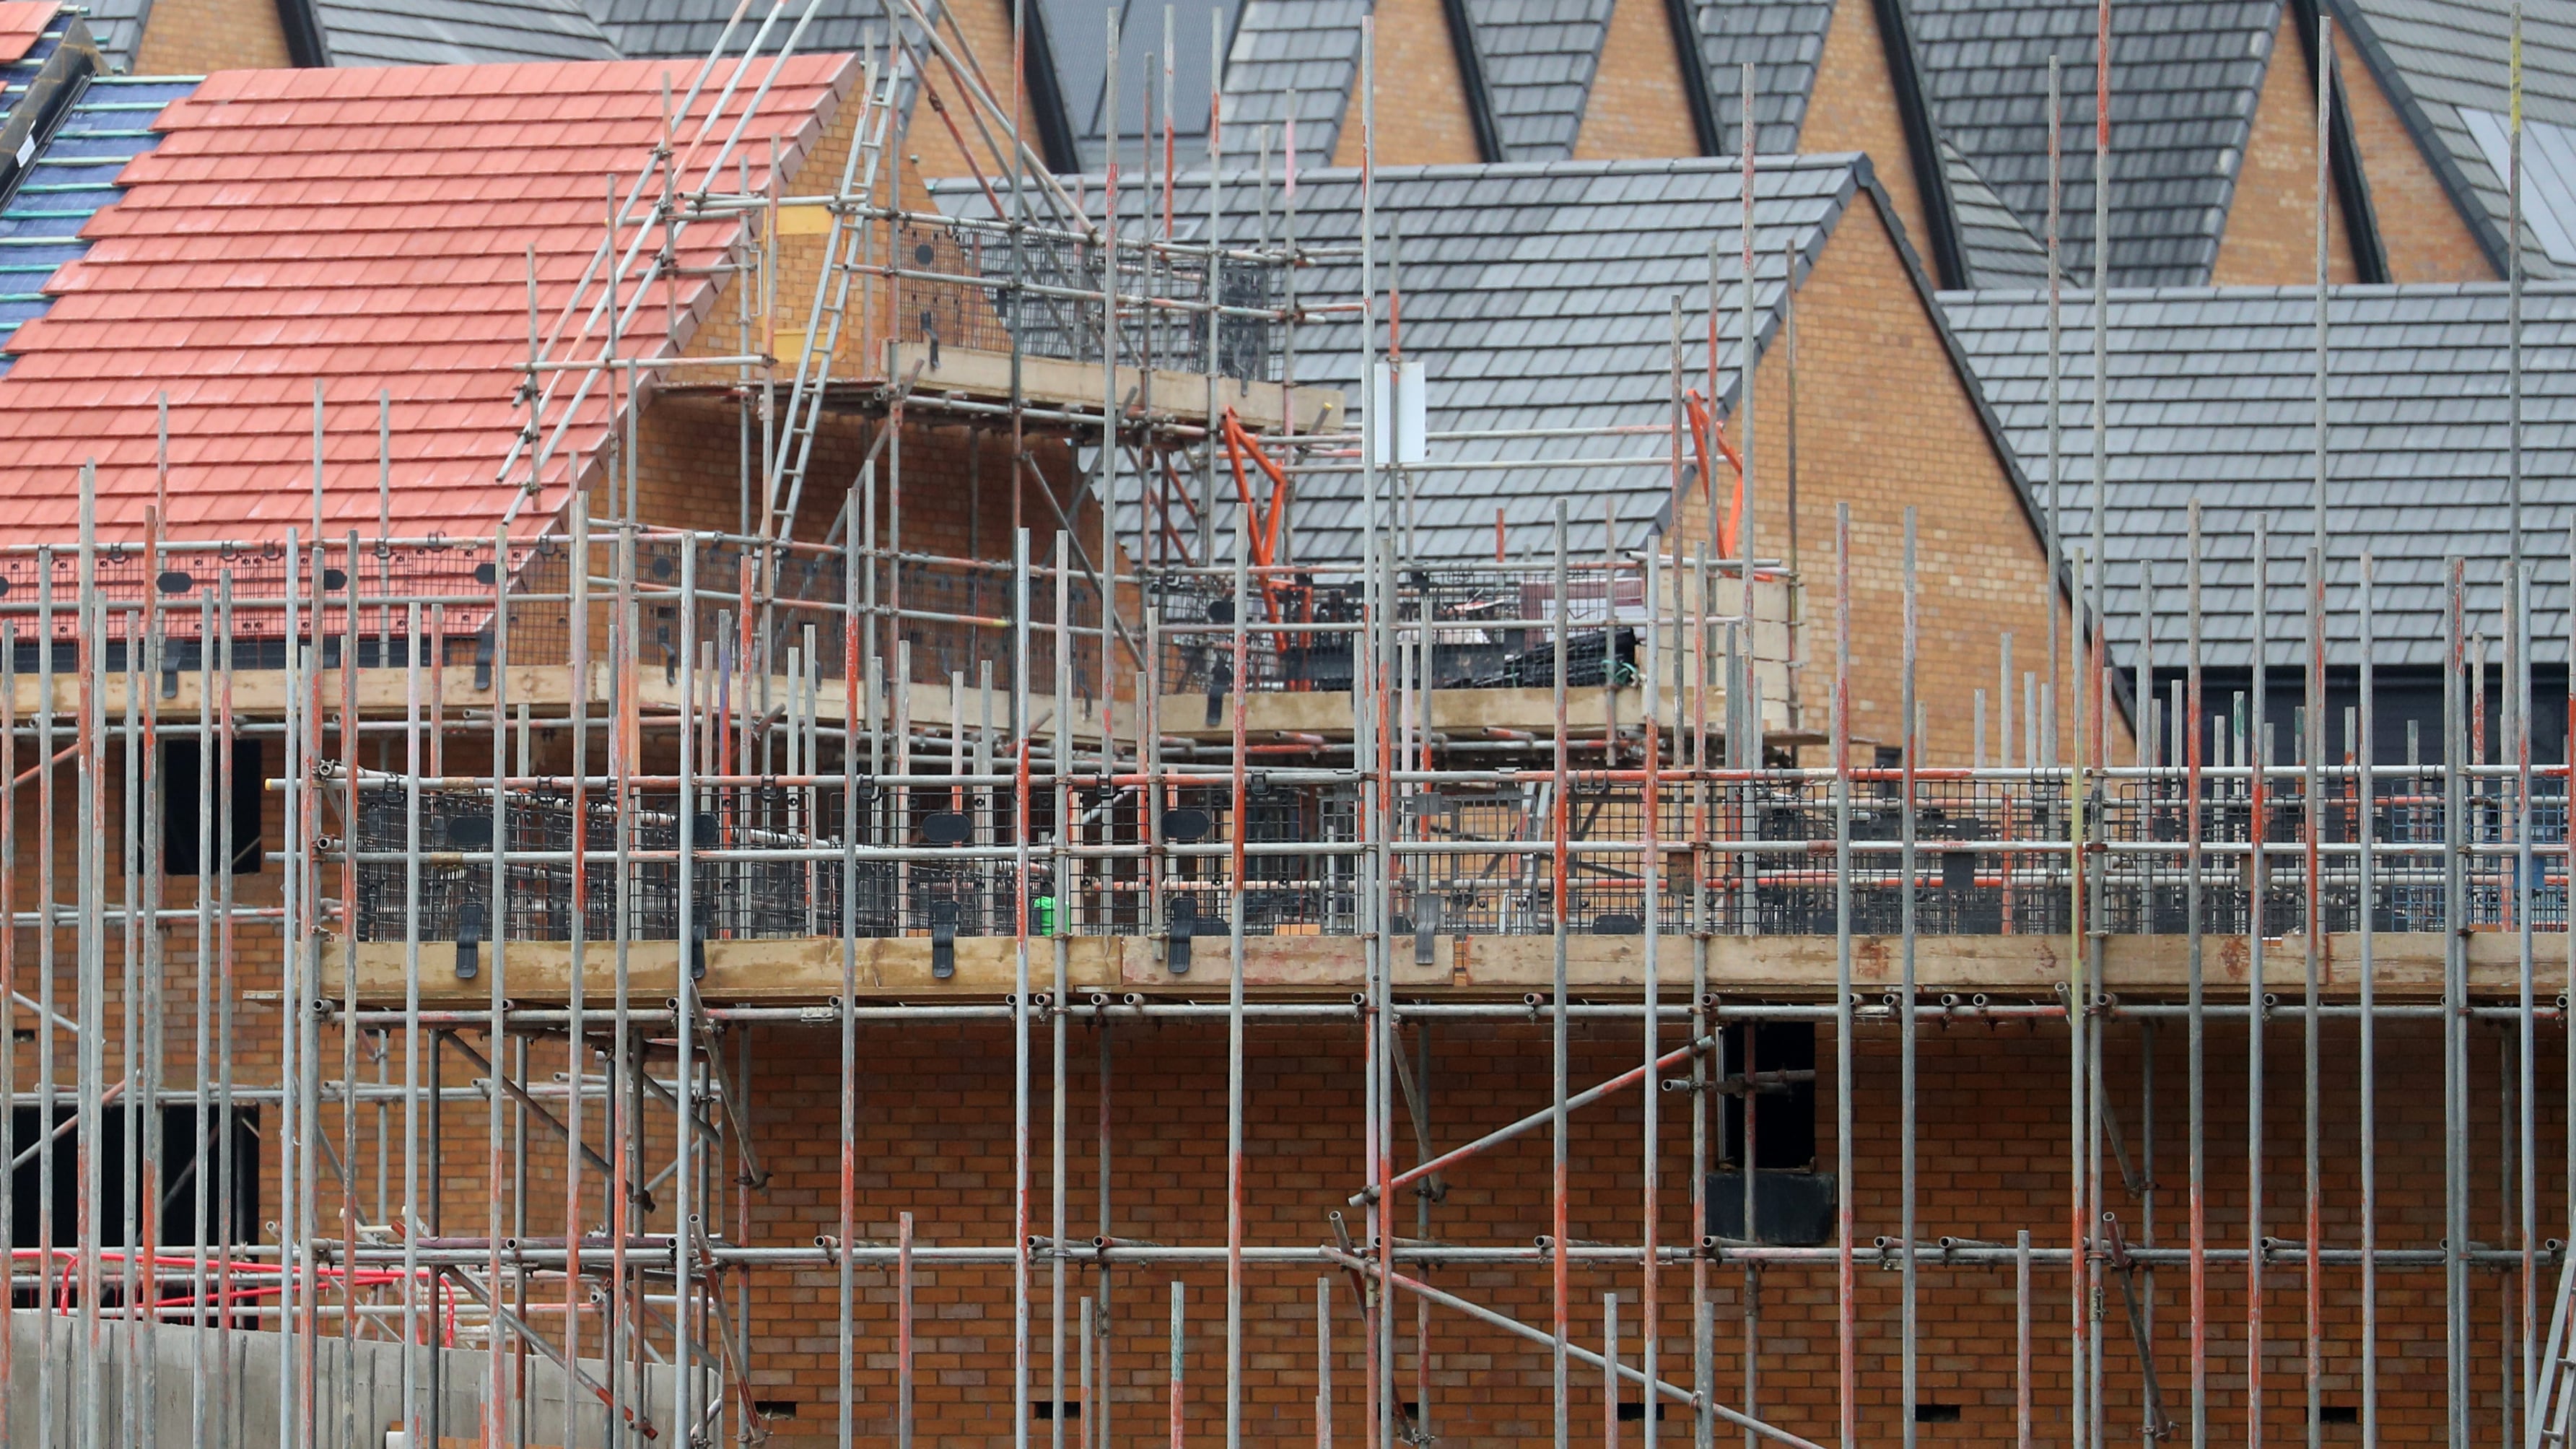 Building firms said momentum improved on the back of rising workloads